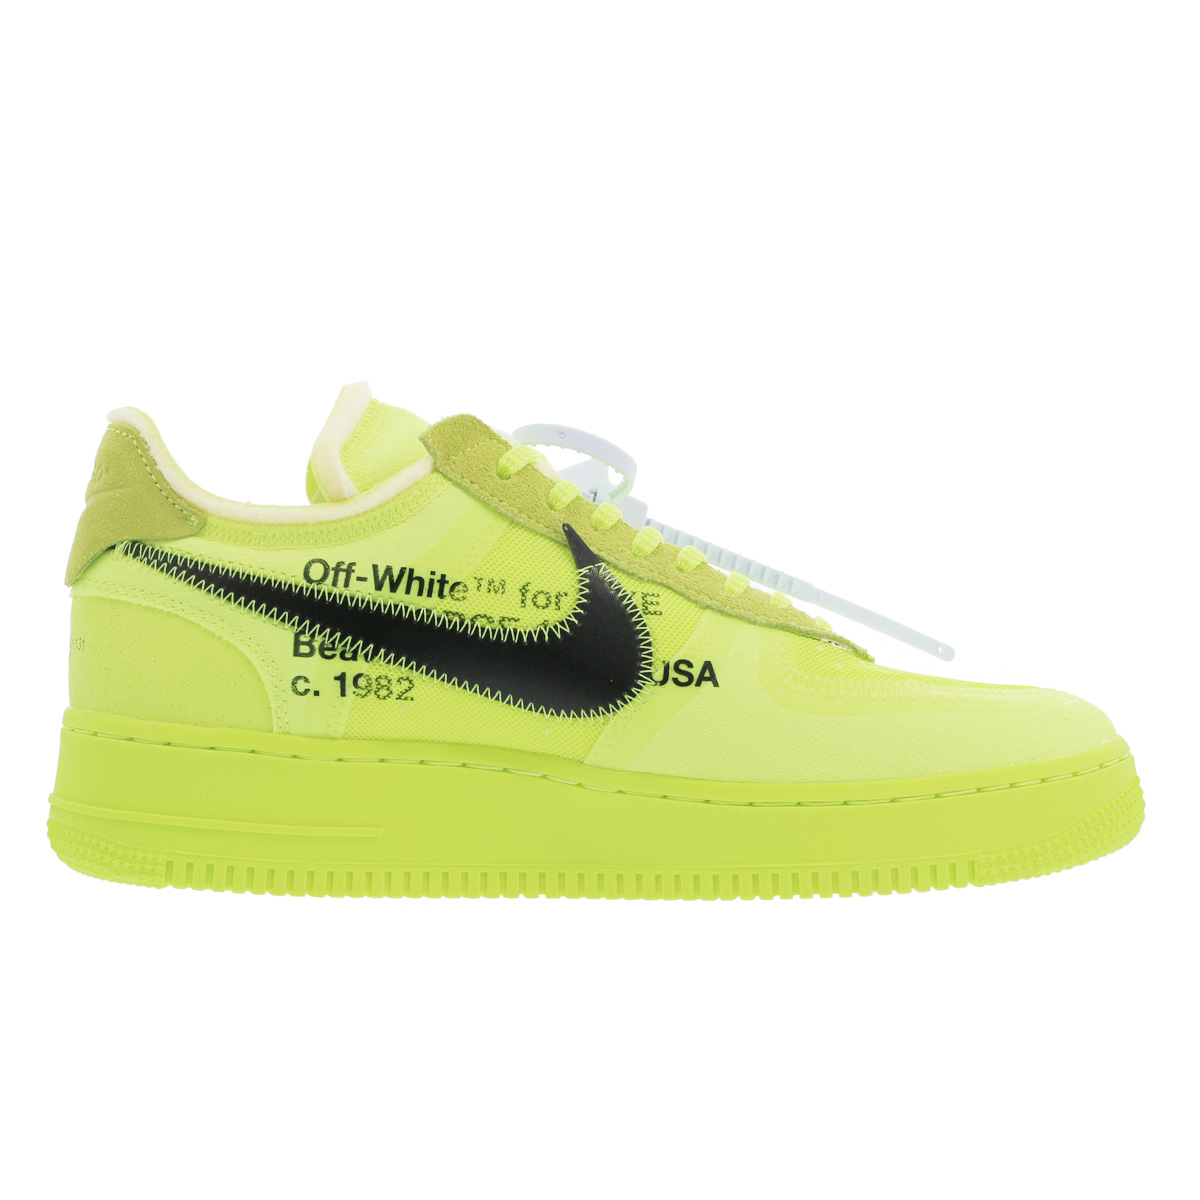 NIKE AIR FORCE 1 LOW 【OFF-WHITE】 【THE 10】 ナイキ エア フォース 1 ロー オフホワイト  VOLT/HYPER JADE/CONE/BLACK ao4606-700 | SELECT SHOP LOWTEX